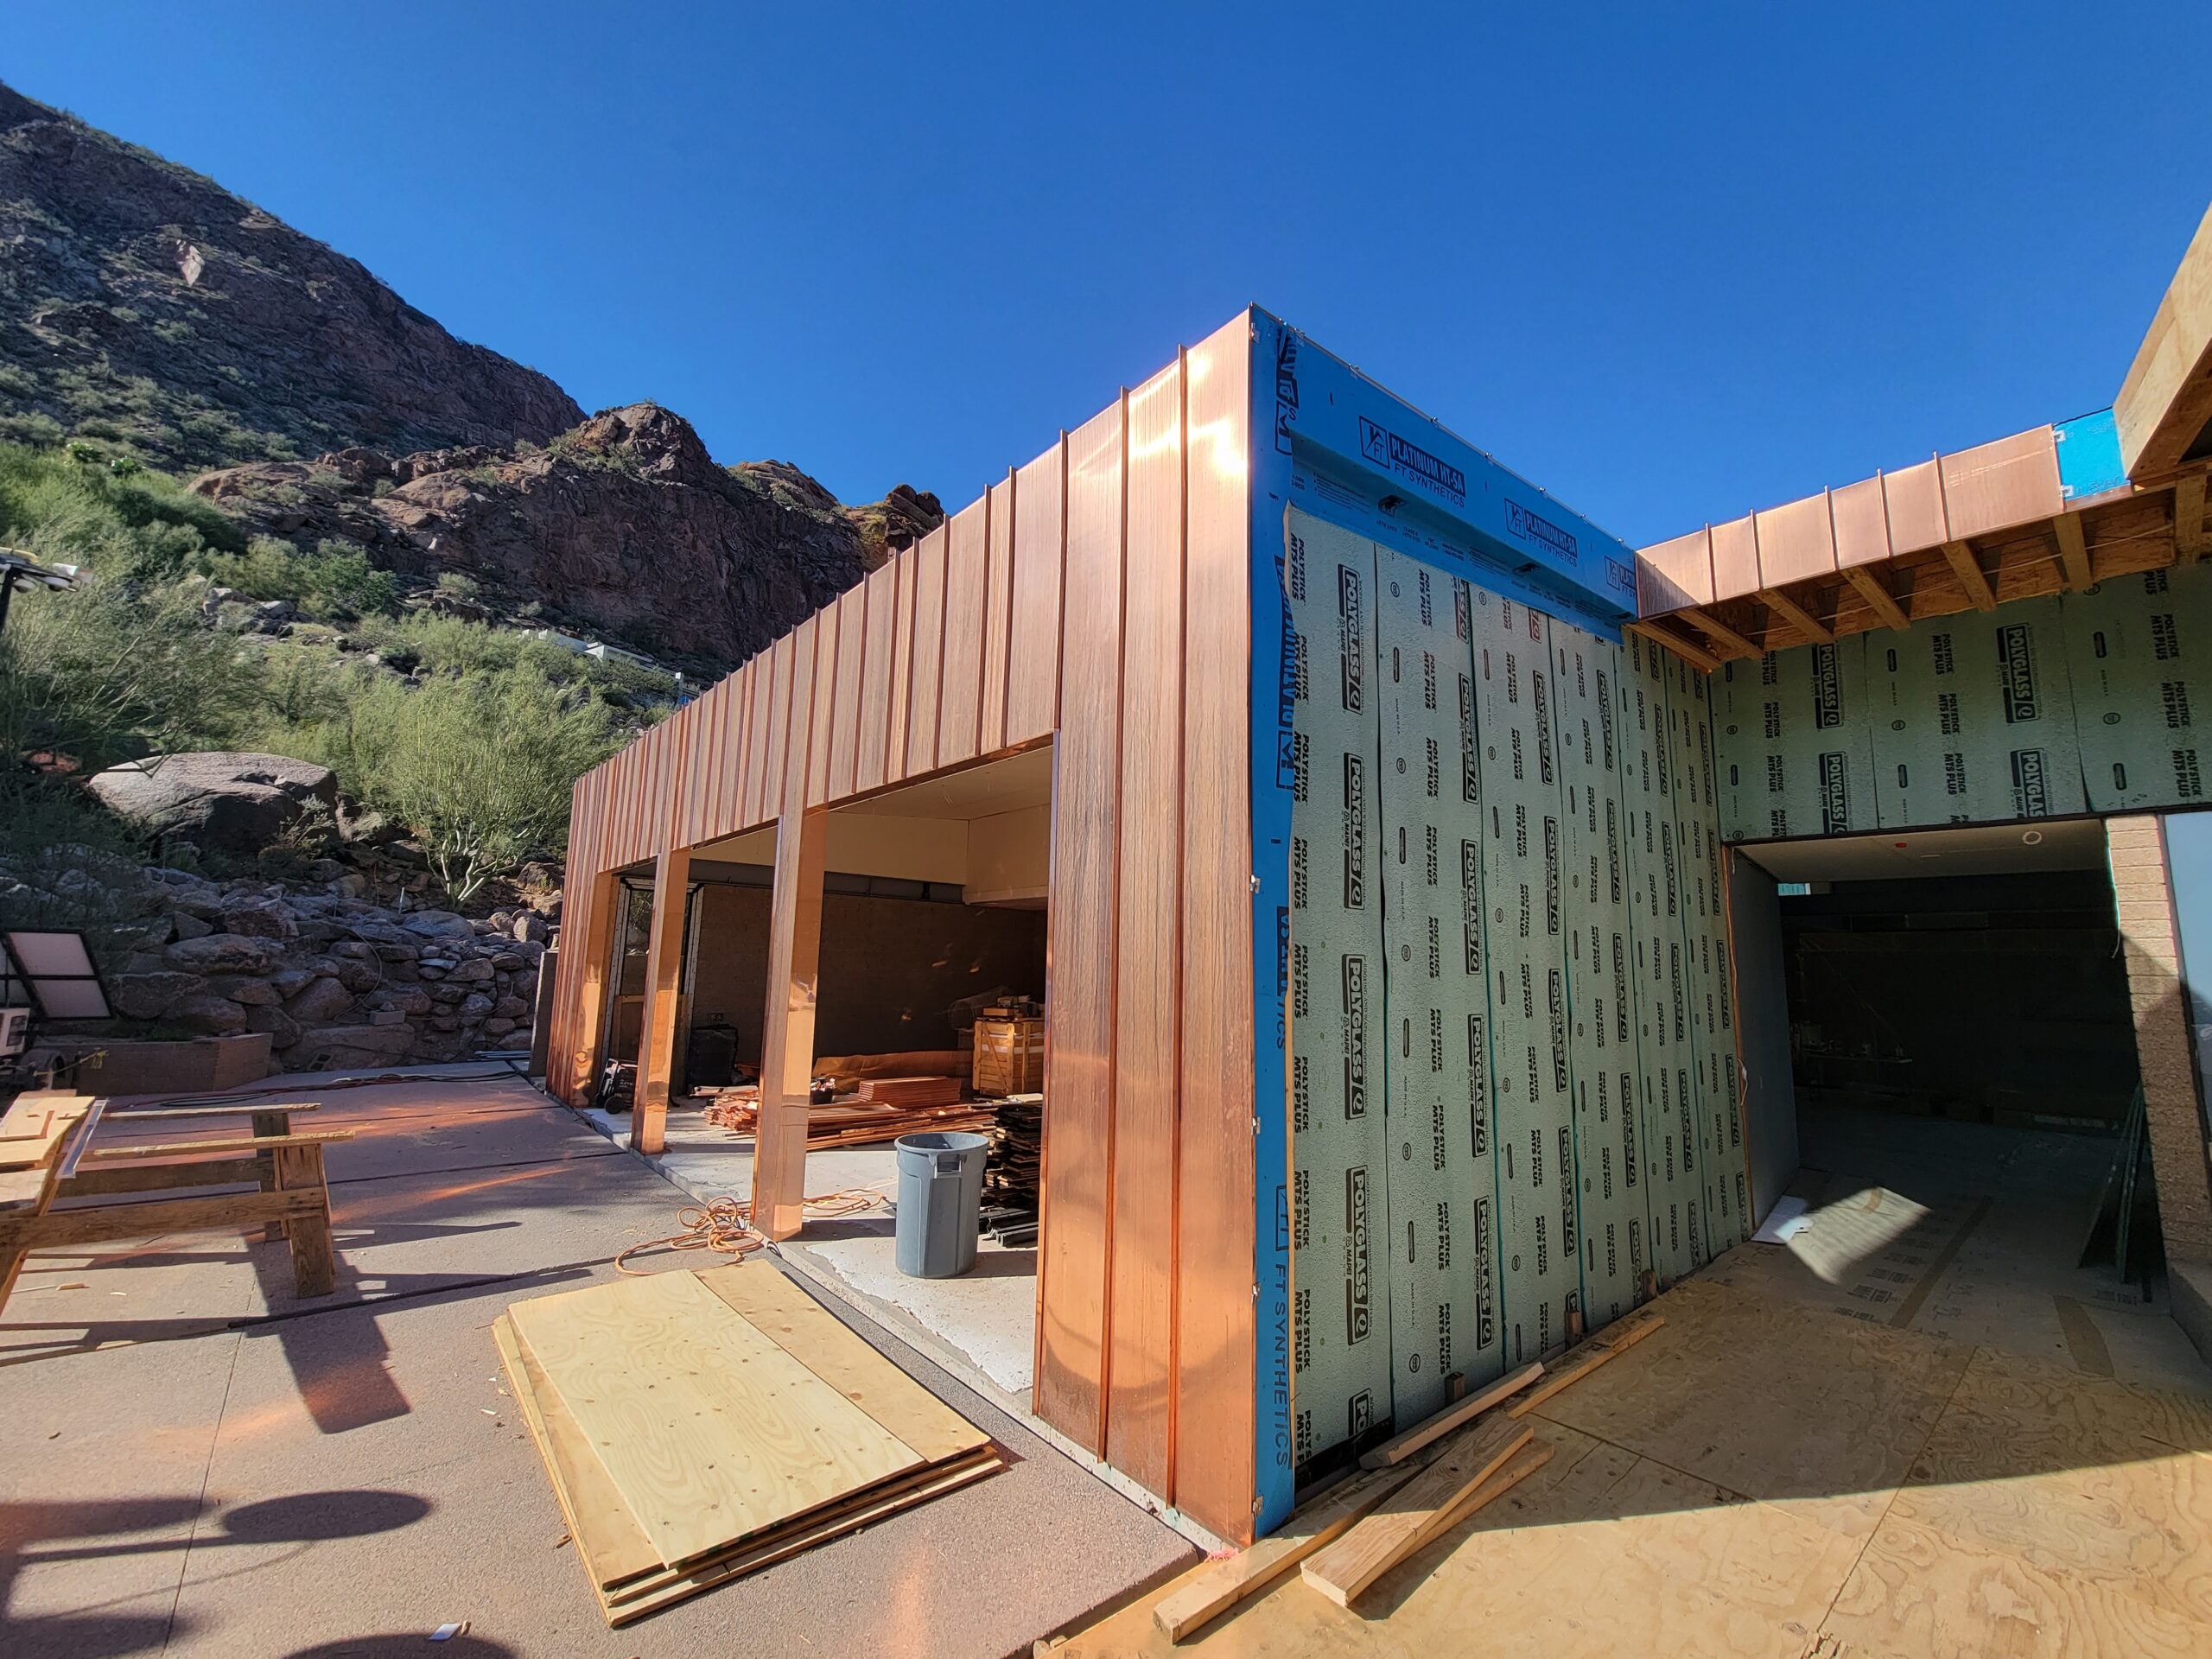 A property is being built with the assistance of Behmer roofing in Whisper Rock.